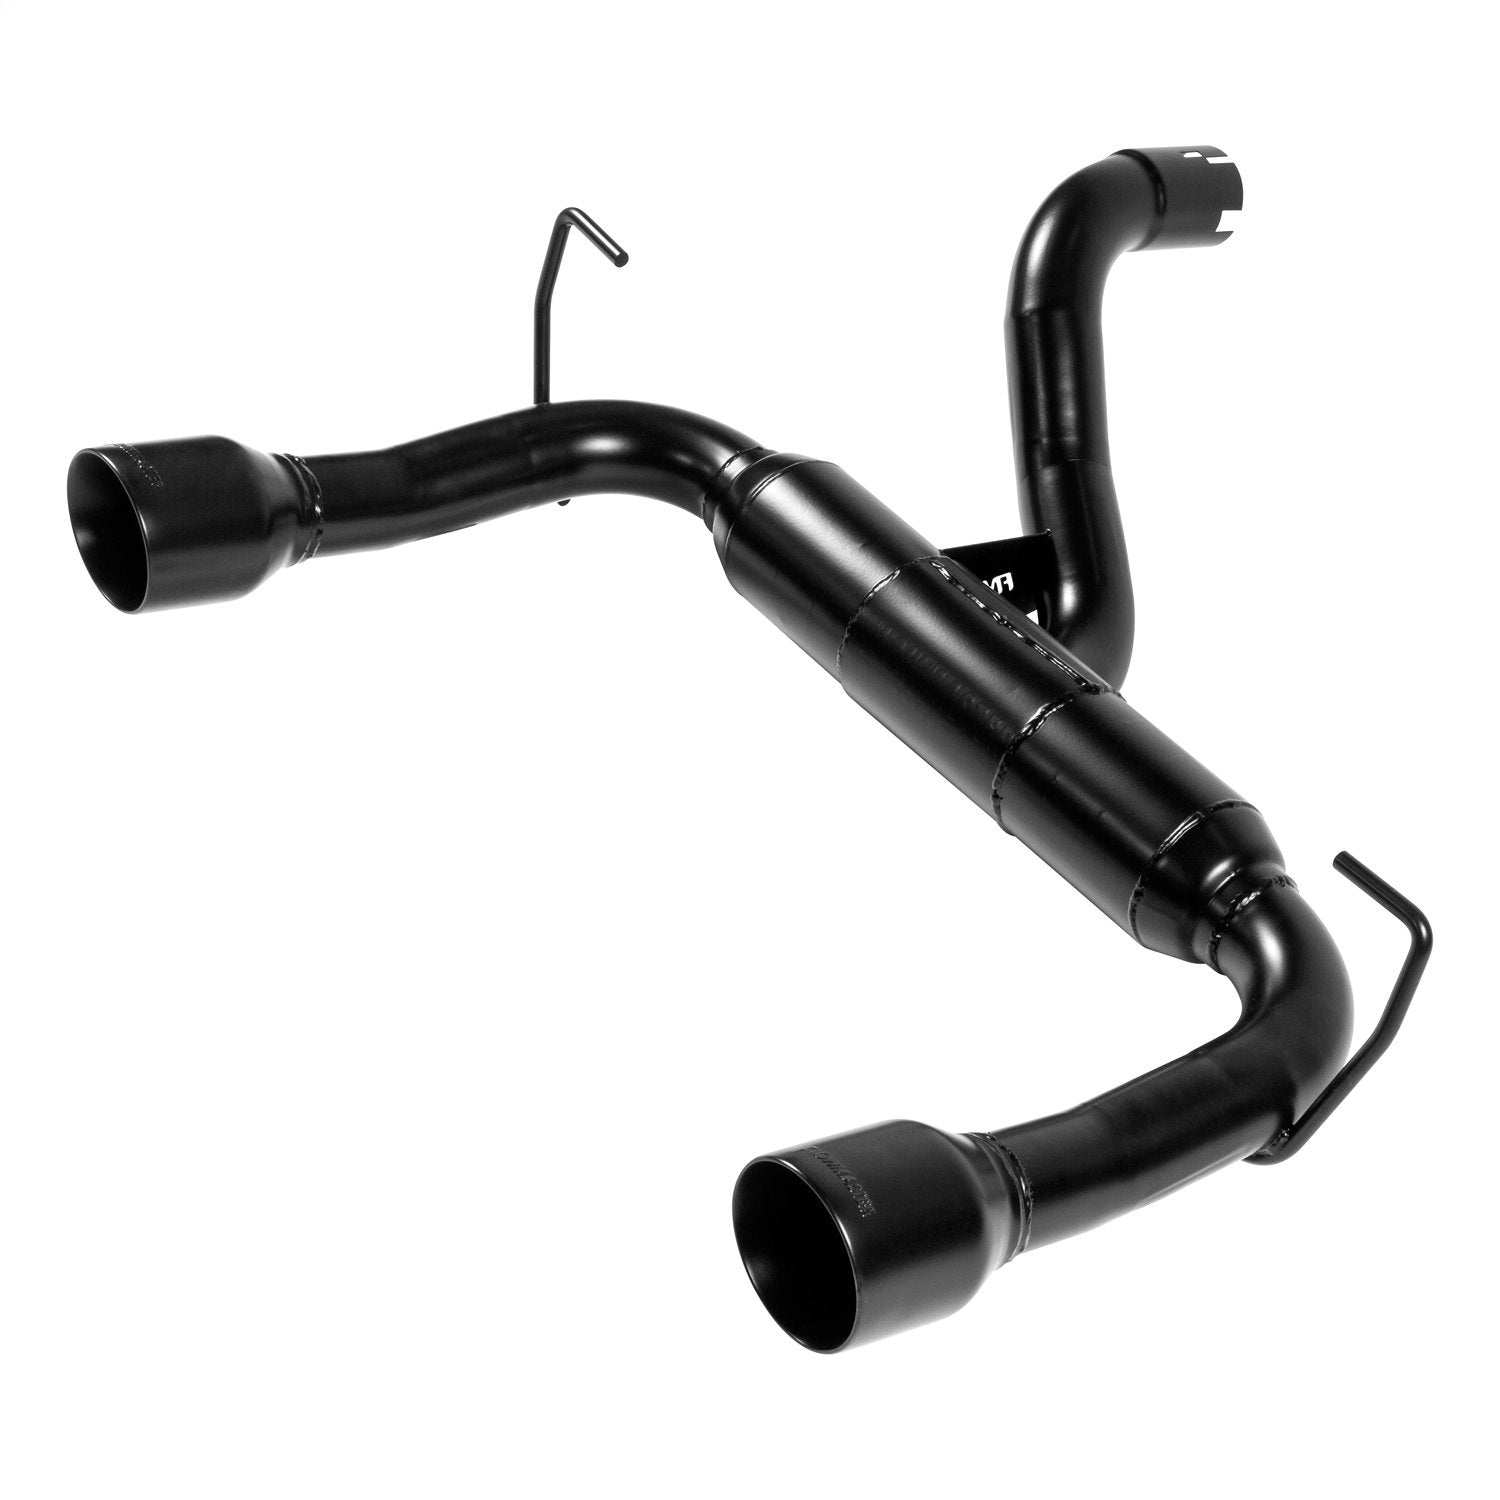 Flowmaster 817803 Outlaw Series Axle Back Exhaust System Fits Wrangler (JL)